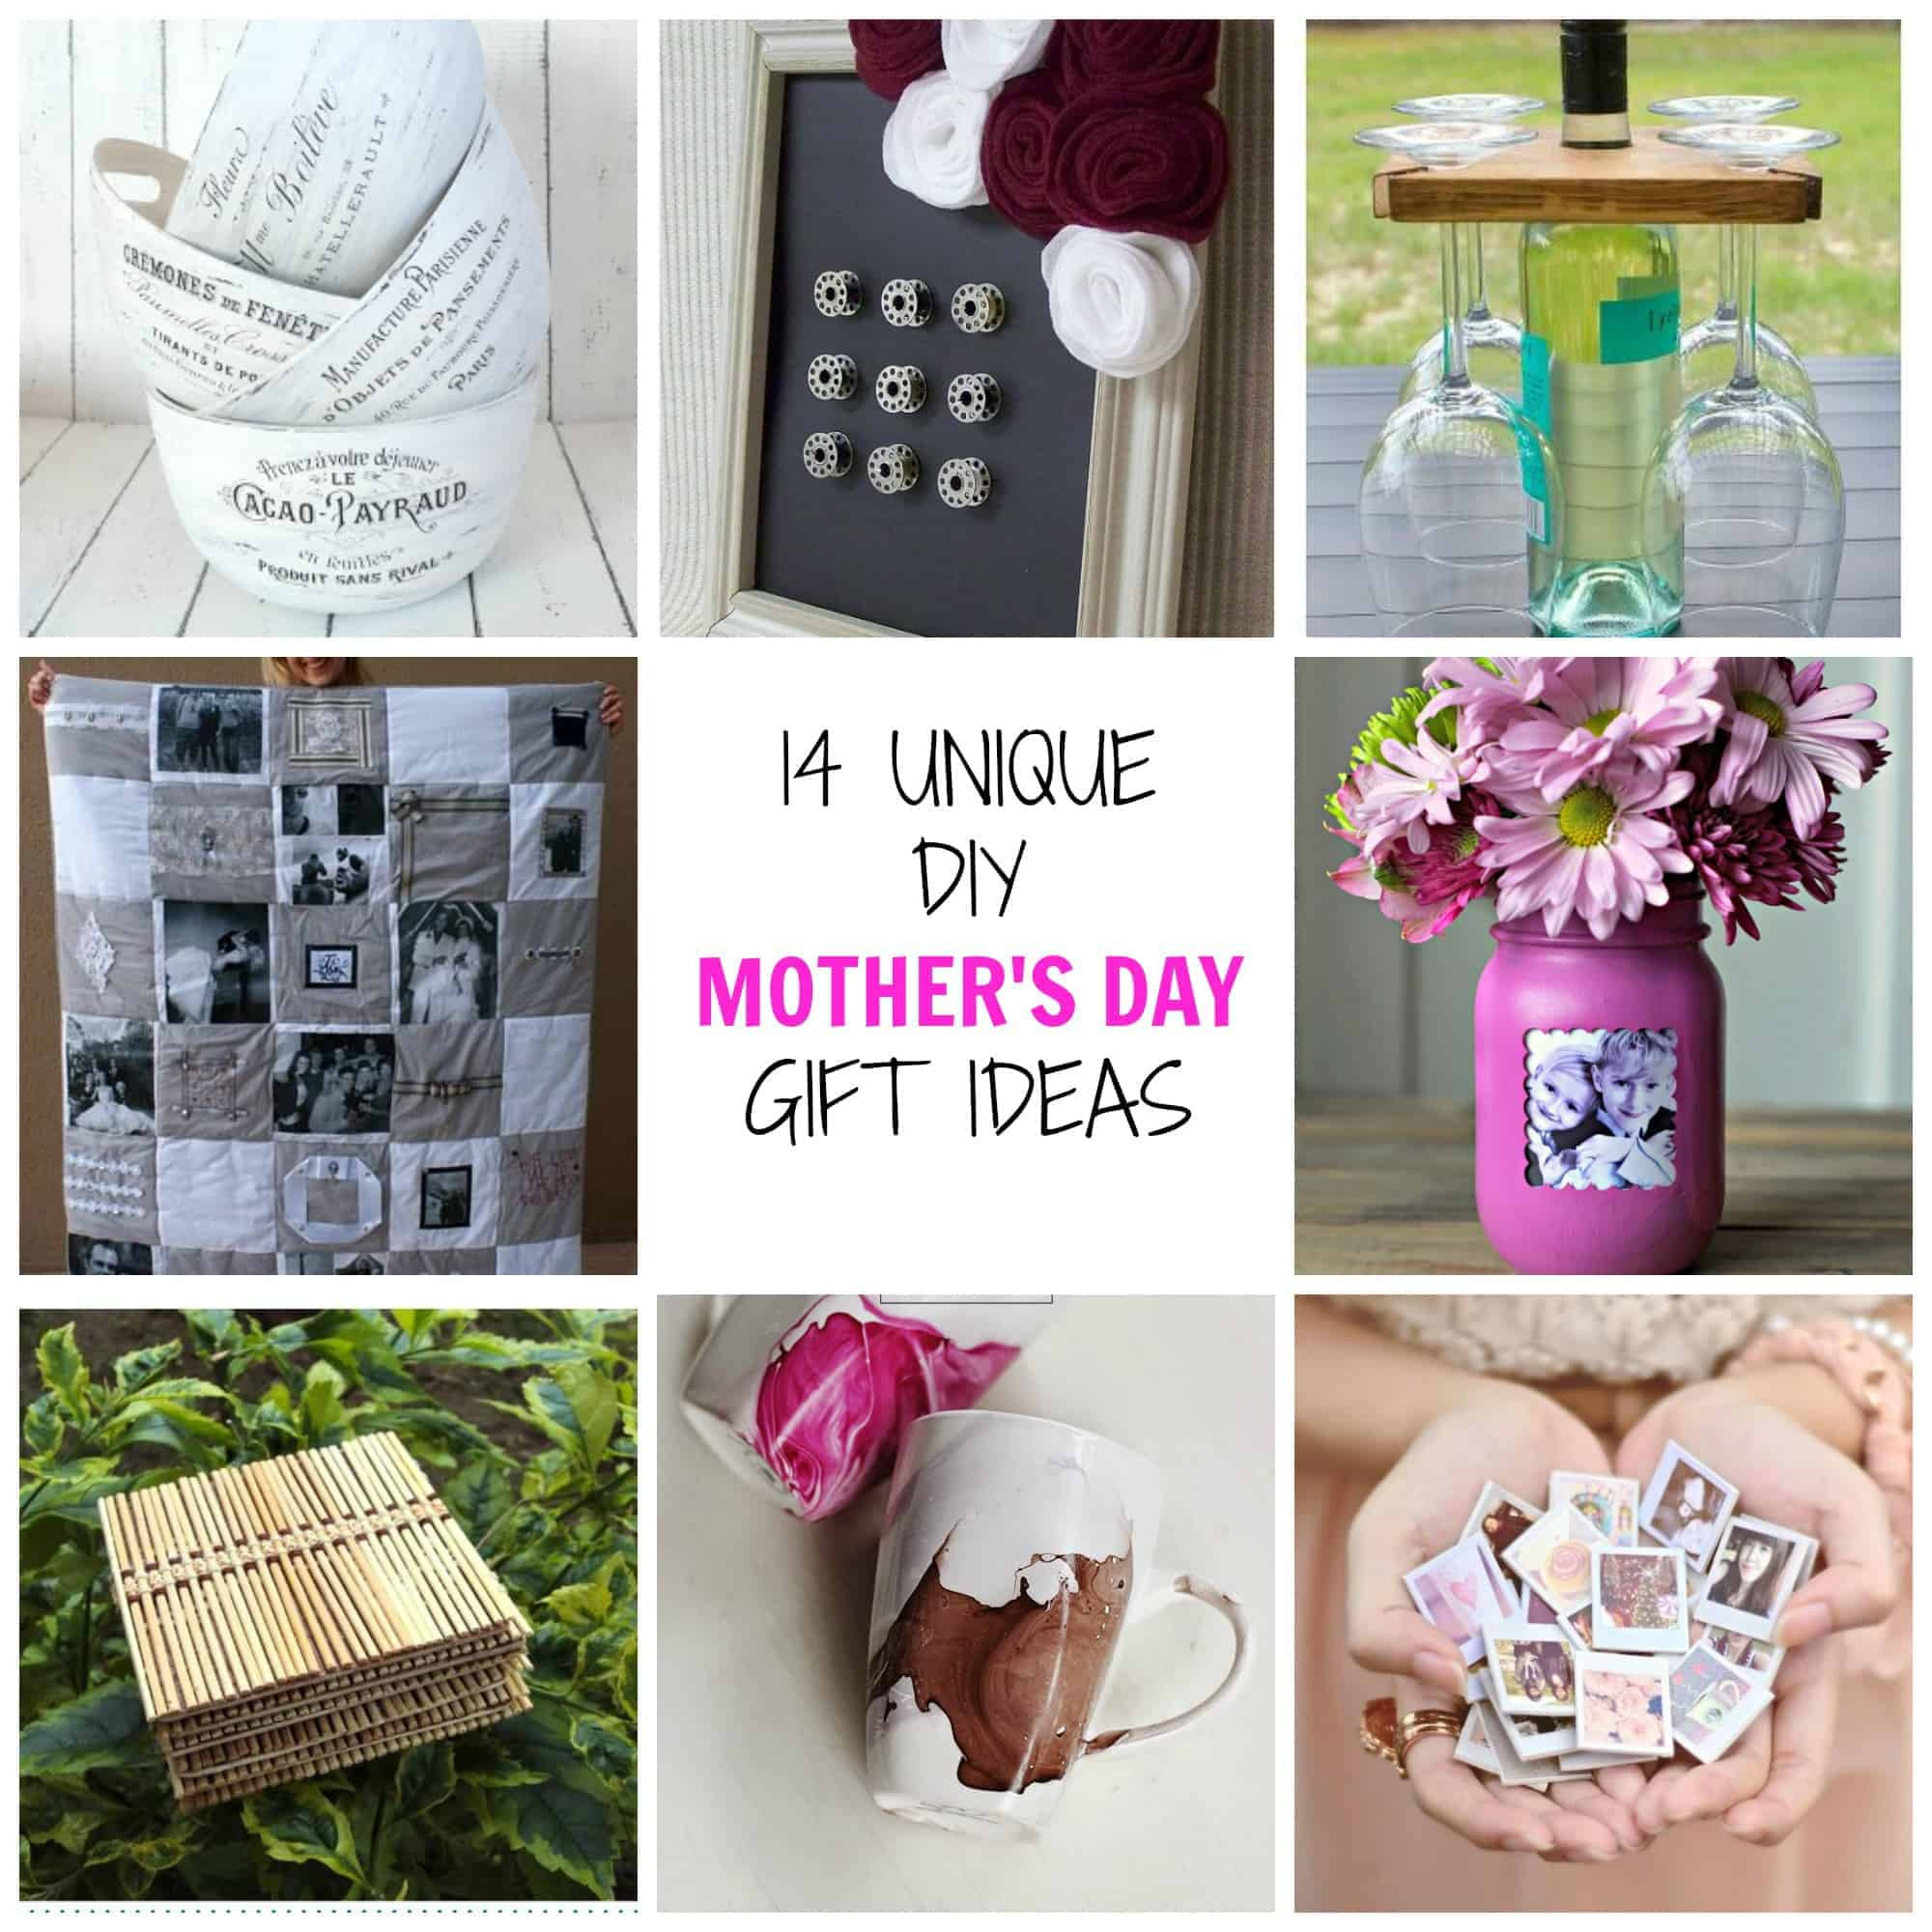 Creative Mothers Day Gift Ideas
 14 Unique DIY Mother s Day Gifts Simplify Create Inspire